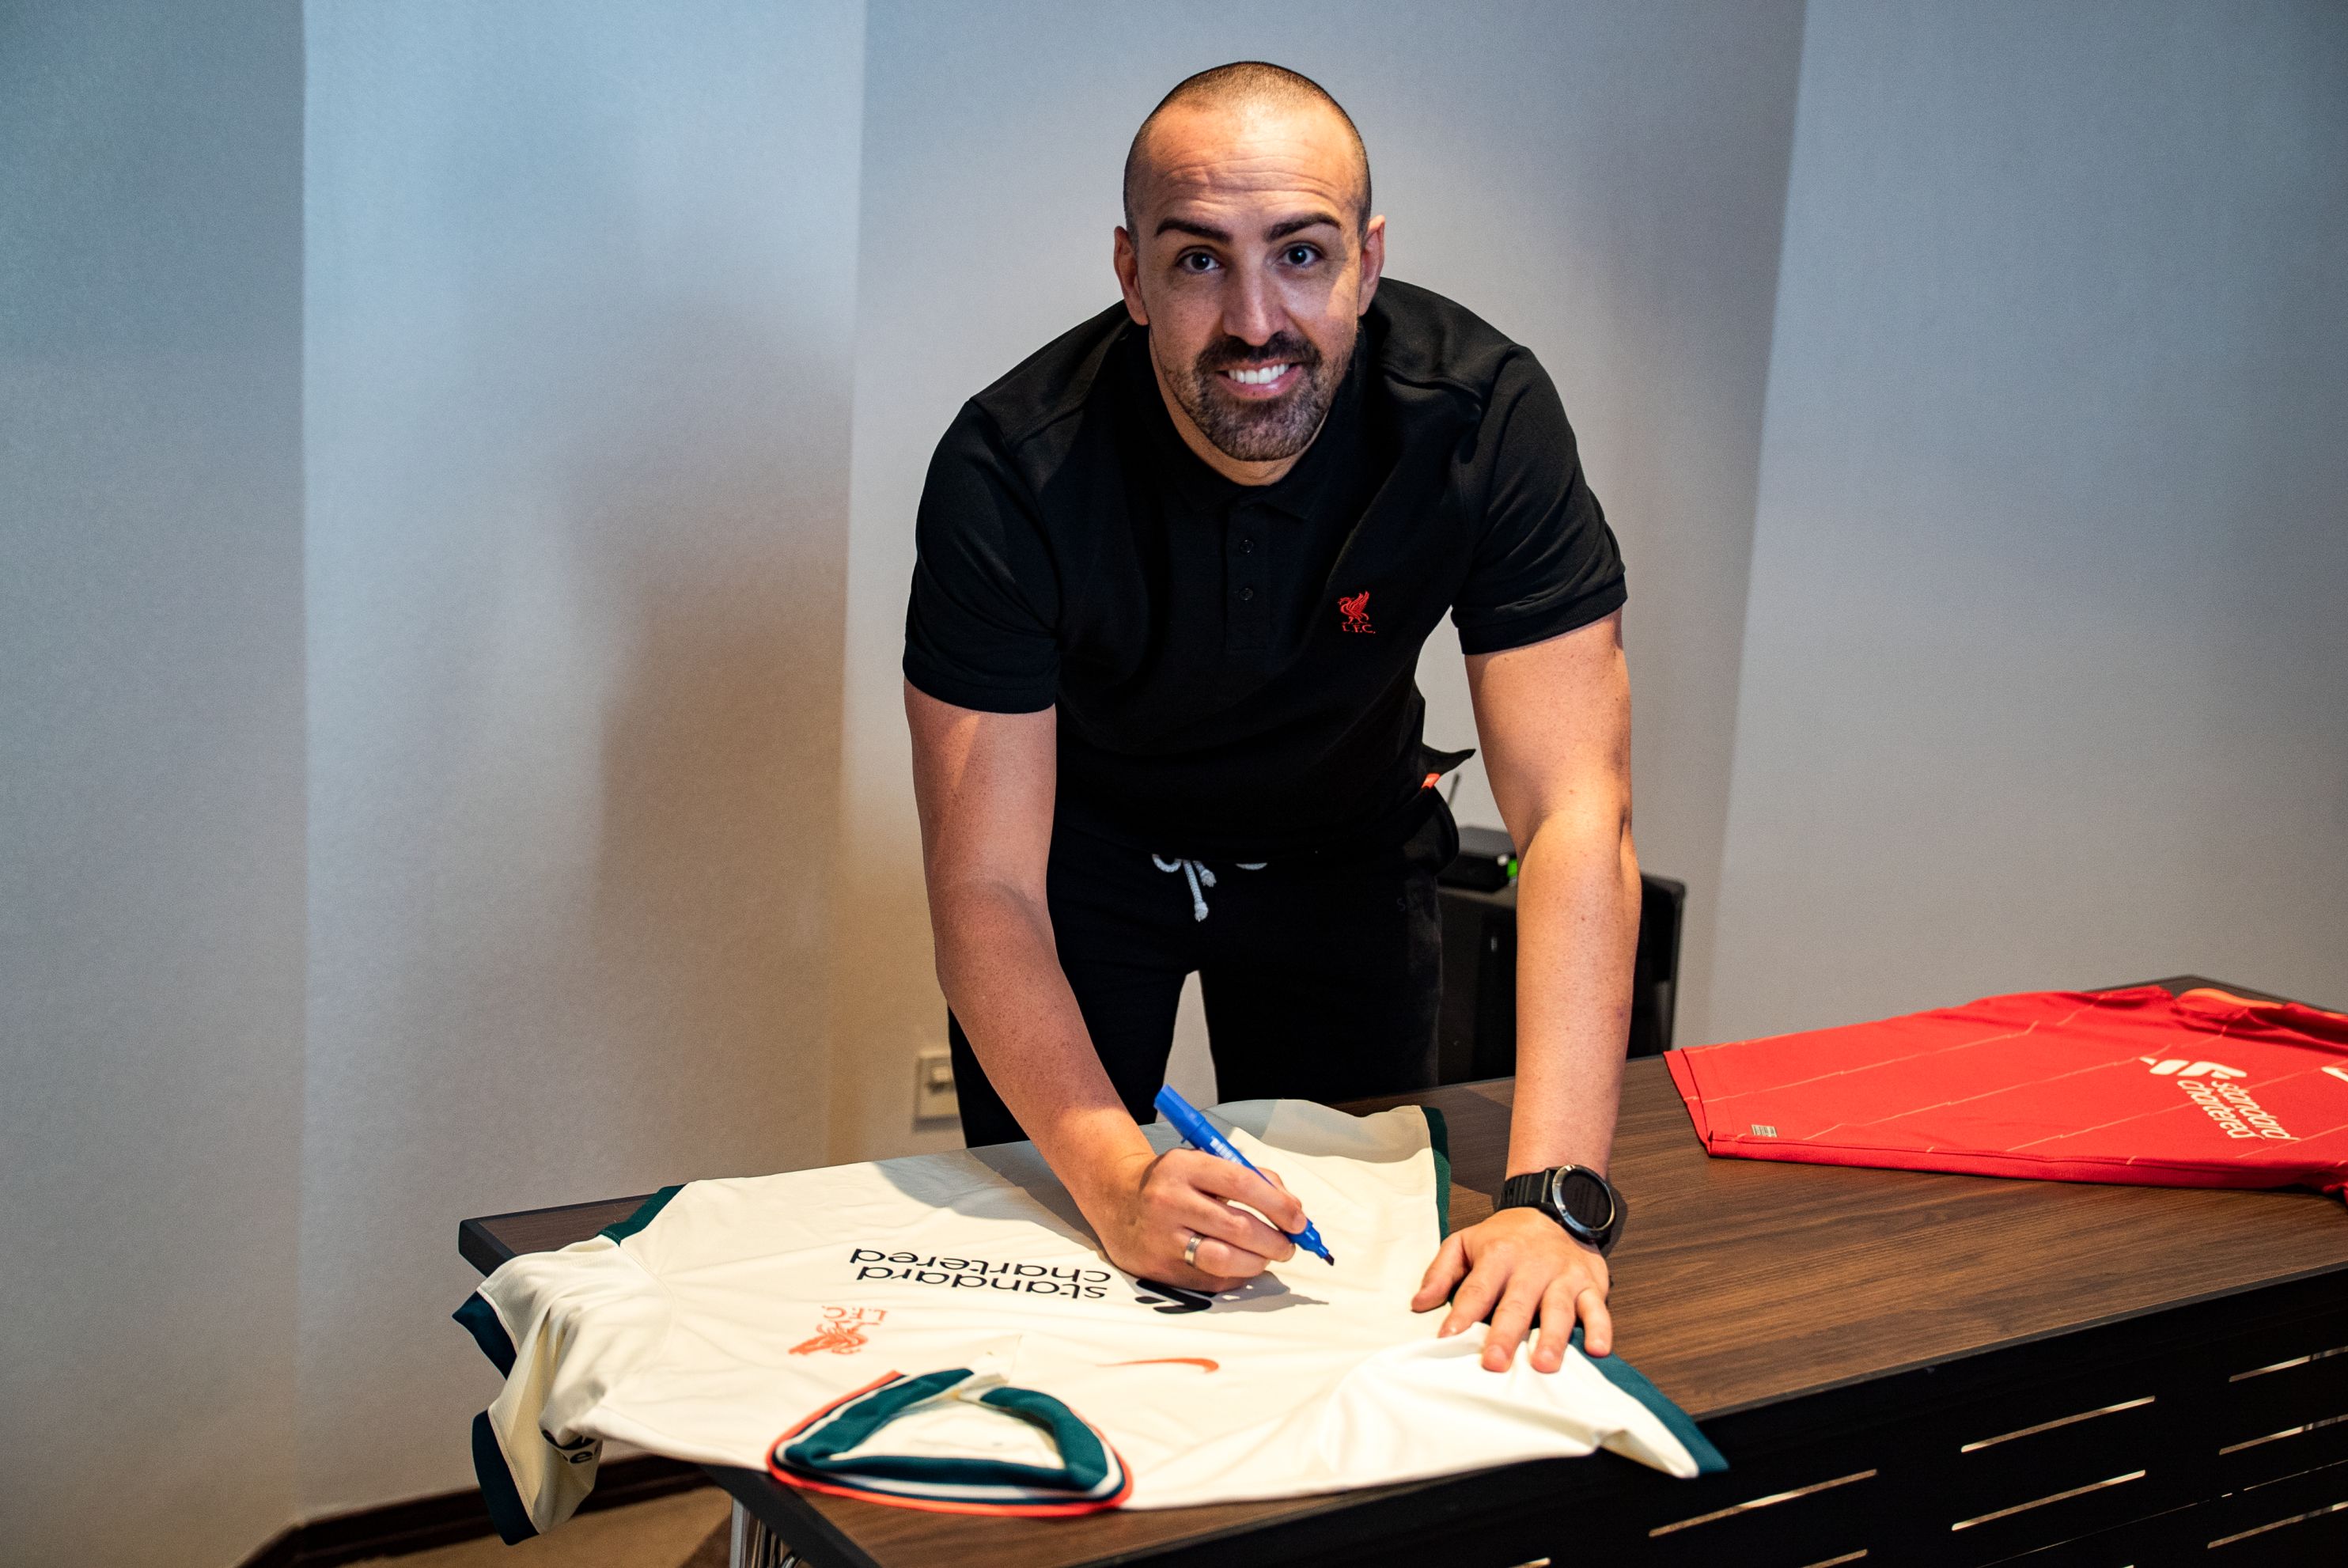 Former Liverpool F.C. player, Jose Enrique,  poses next to MG Motor’s newest star